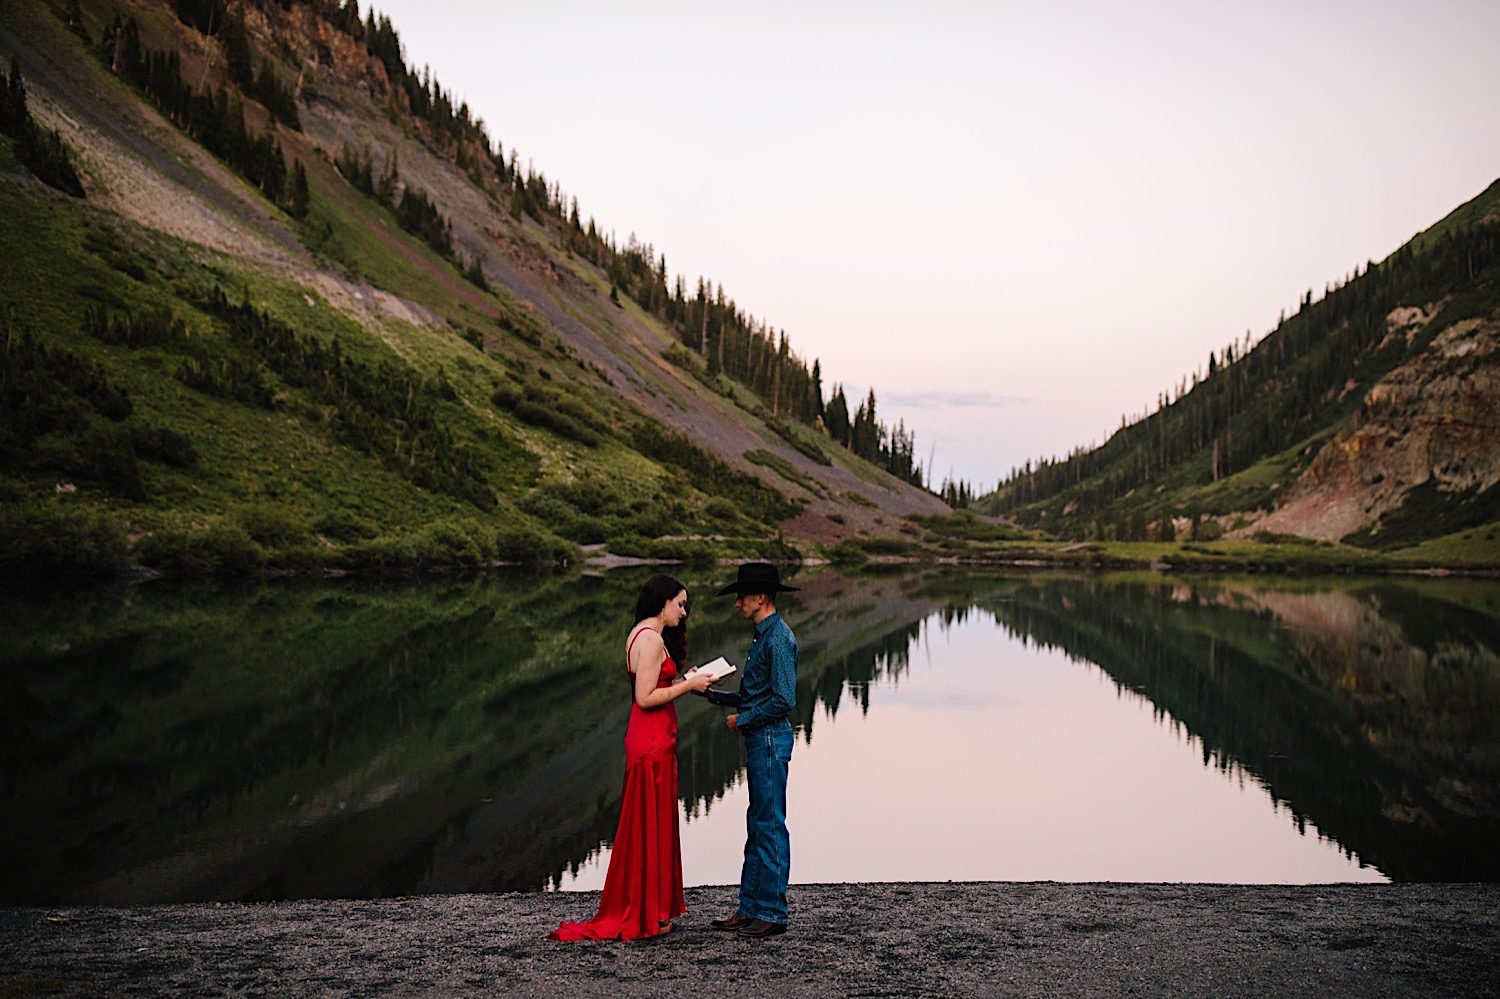 Crested Butte Colorado elopement at Emerald Lake, Crested Butte Elopement, Colorado mountain elopement, Colorado alpine lake elopement, Colorado adventure elopement, hiking elopement, mountain elopement, Colorado elopement photographer, Crested Butte elopement photographer, Telluride elopement photographer, Ouray elopement photographer, Western slope Colorado photographer, Colorado elopement, Elopement ideas, Elopement planning, Adventure elopement, How to elope, Self solemnizing elopement